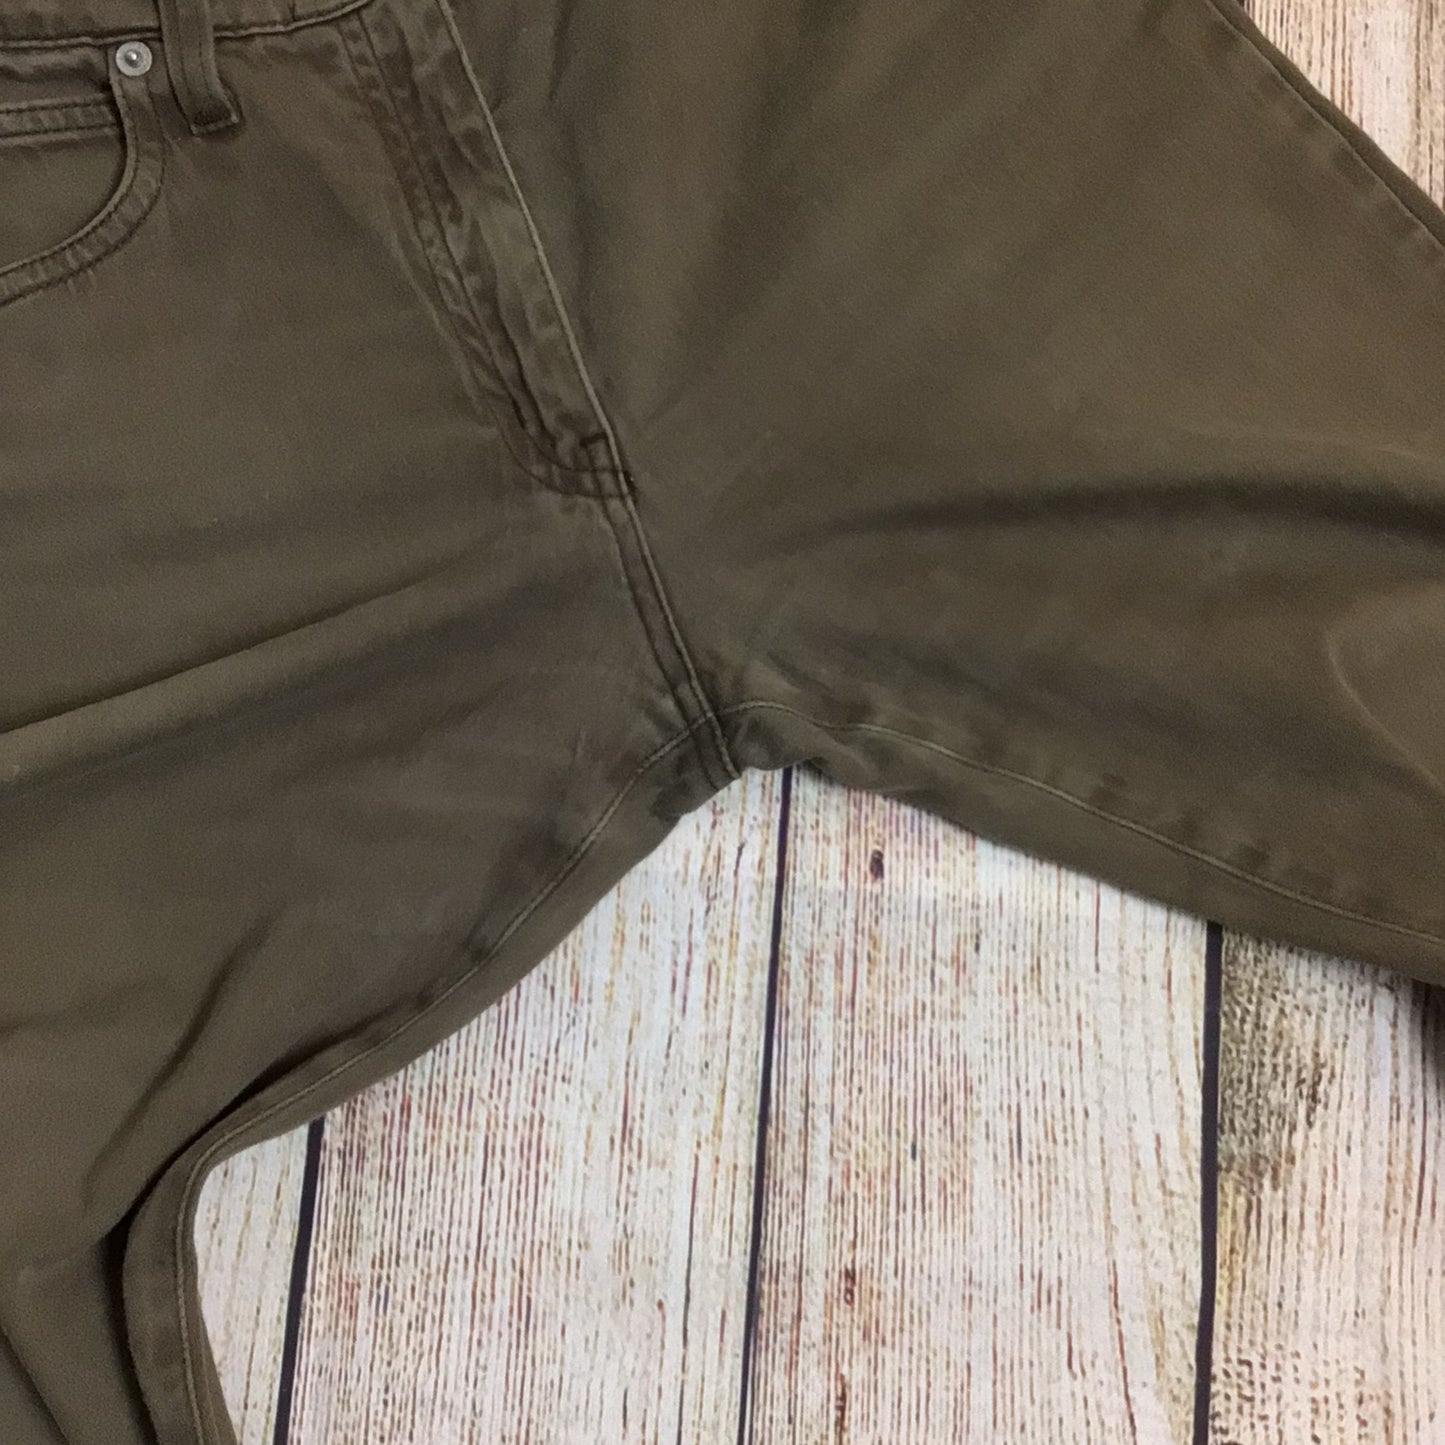 Armani Jeans Olive Green/Brown Trousers 98% Cotton Size 27